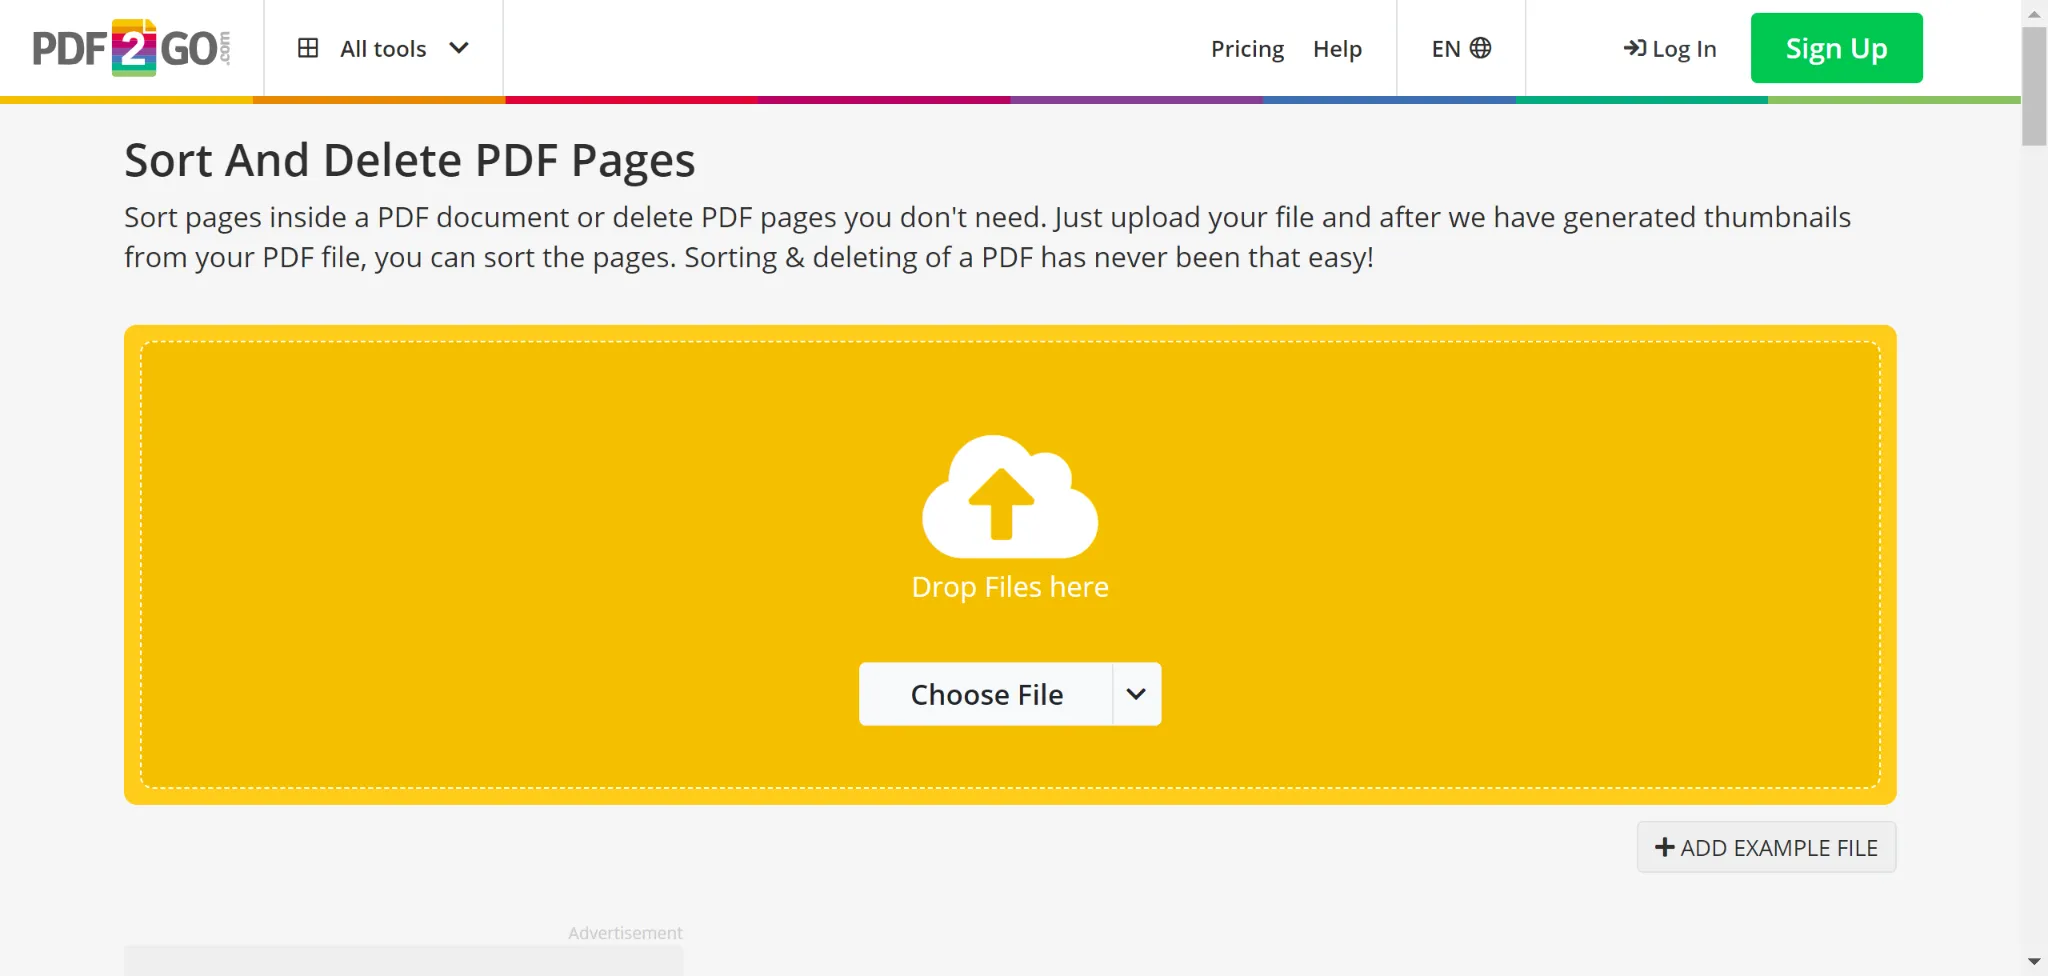 Sort and Delete PDF Pages